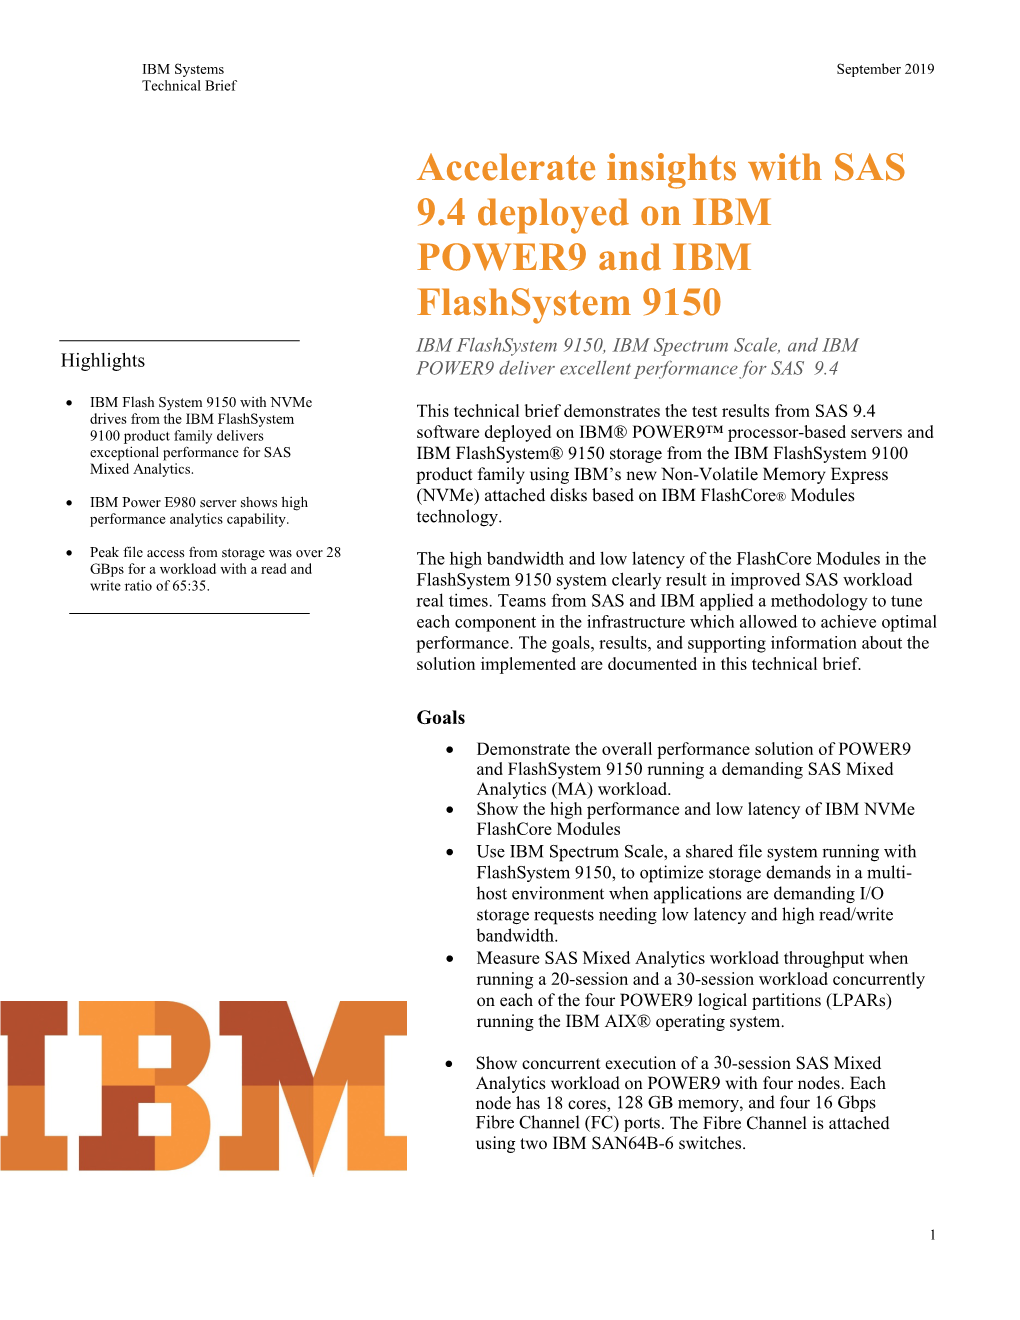 Accelerate Insights with SAS 9.4 Deployed on IBM POWER9 and IBM Flashsystem 9150